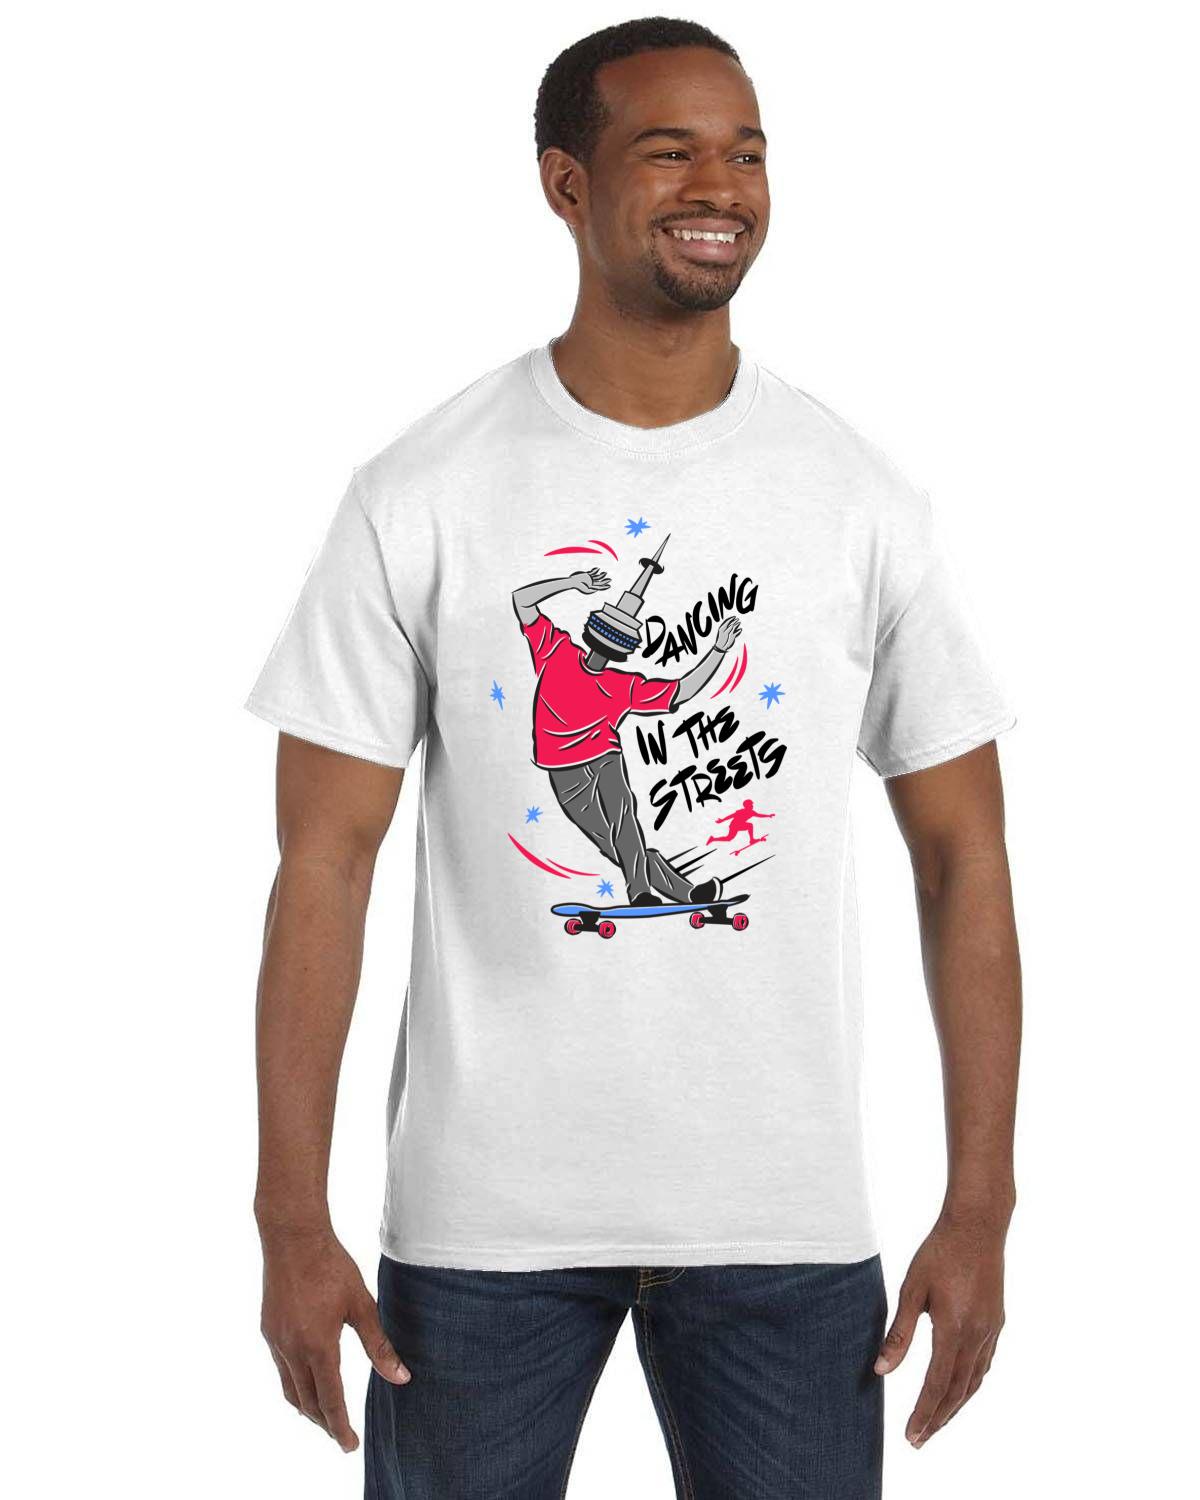 CN Tower DITS Shirt - Dancing in the Streets